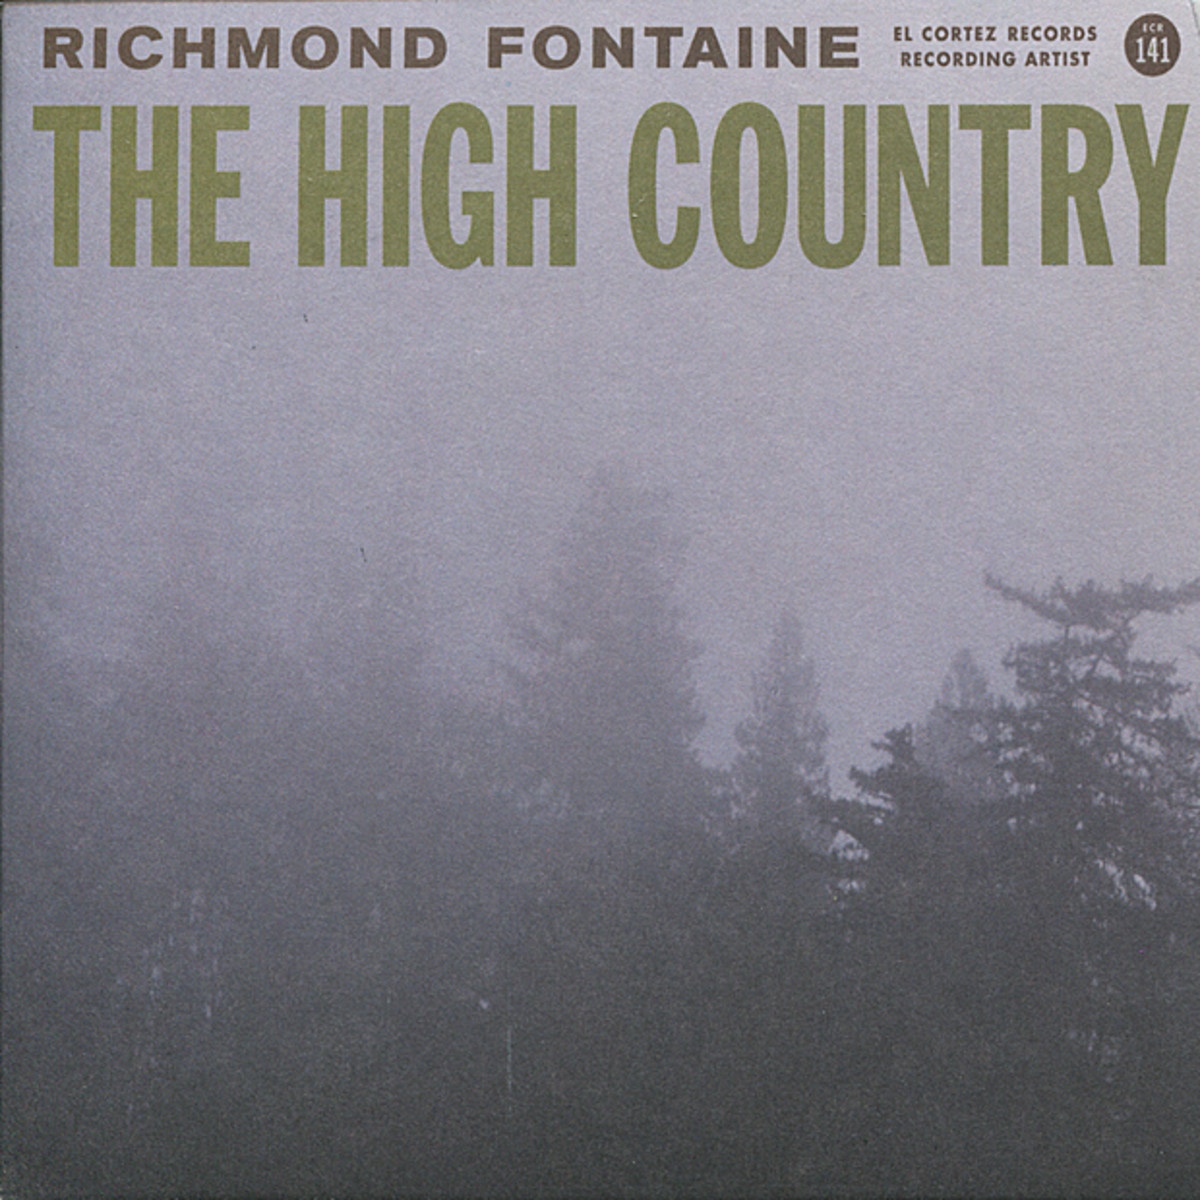 richmond fontaine discography torrents